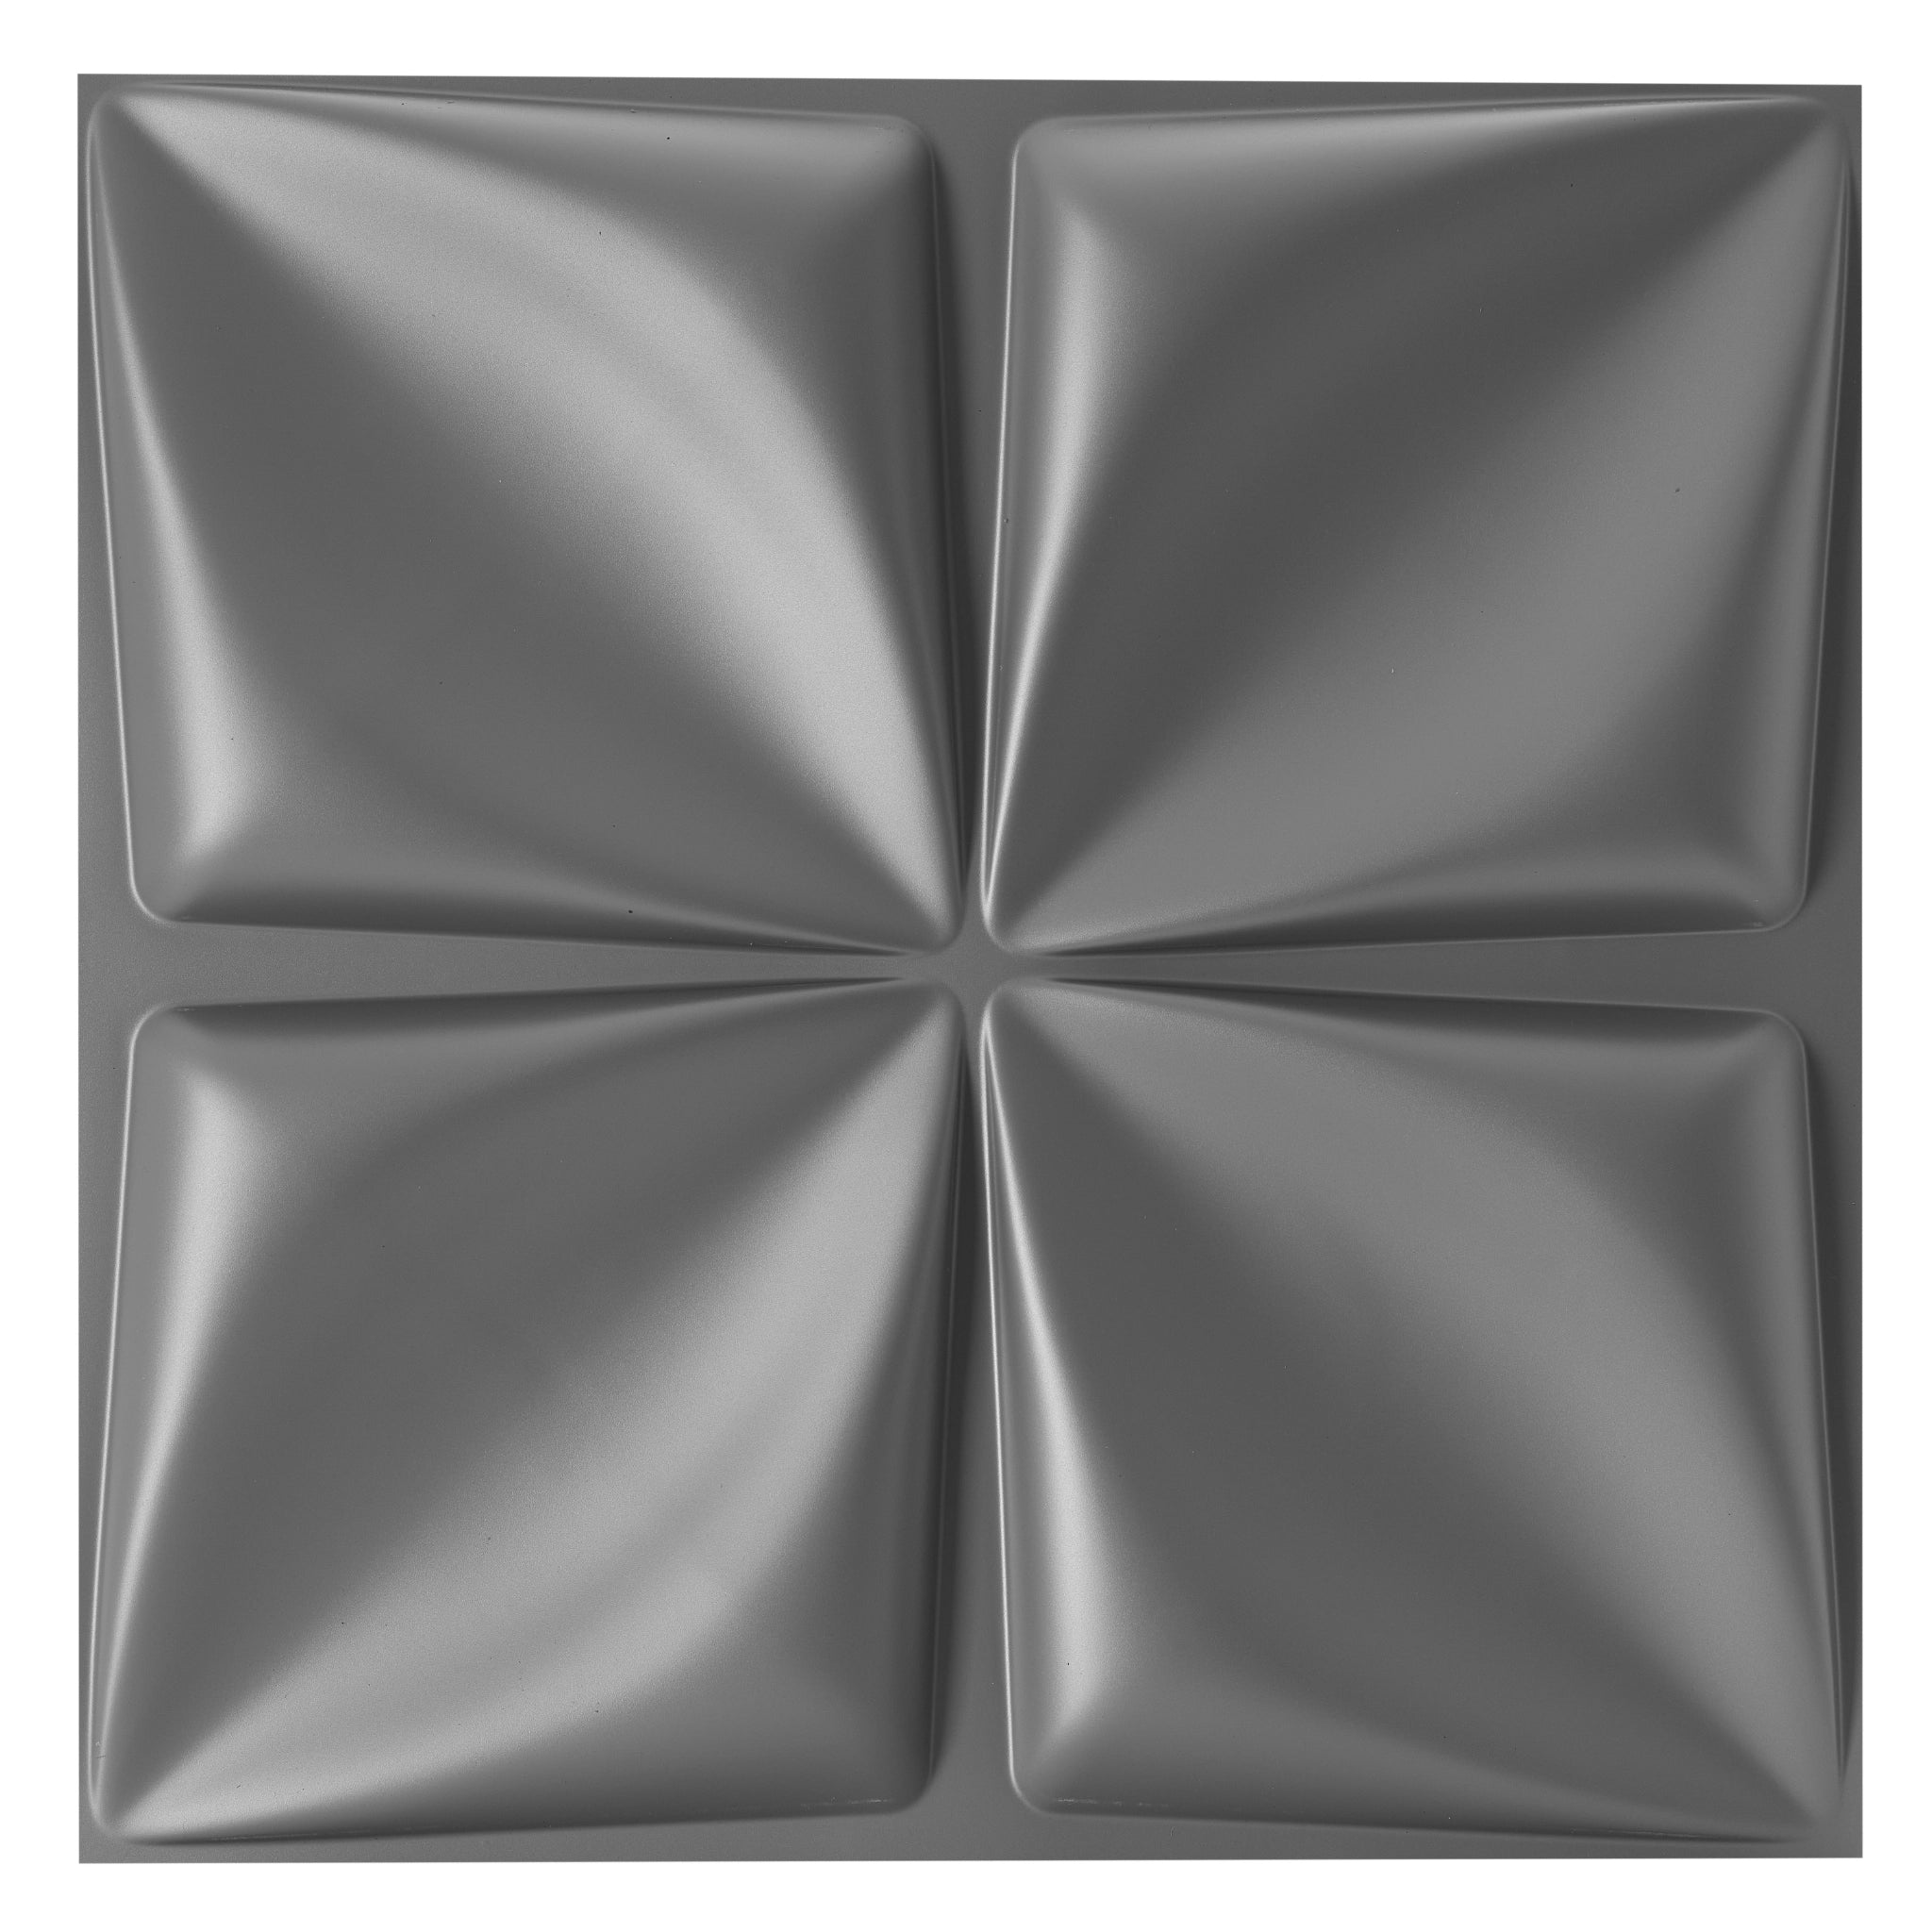 Black PVC wall panel with four raised squares design.